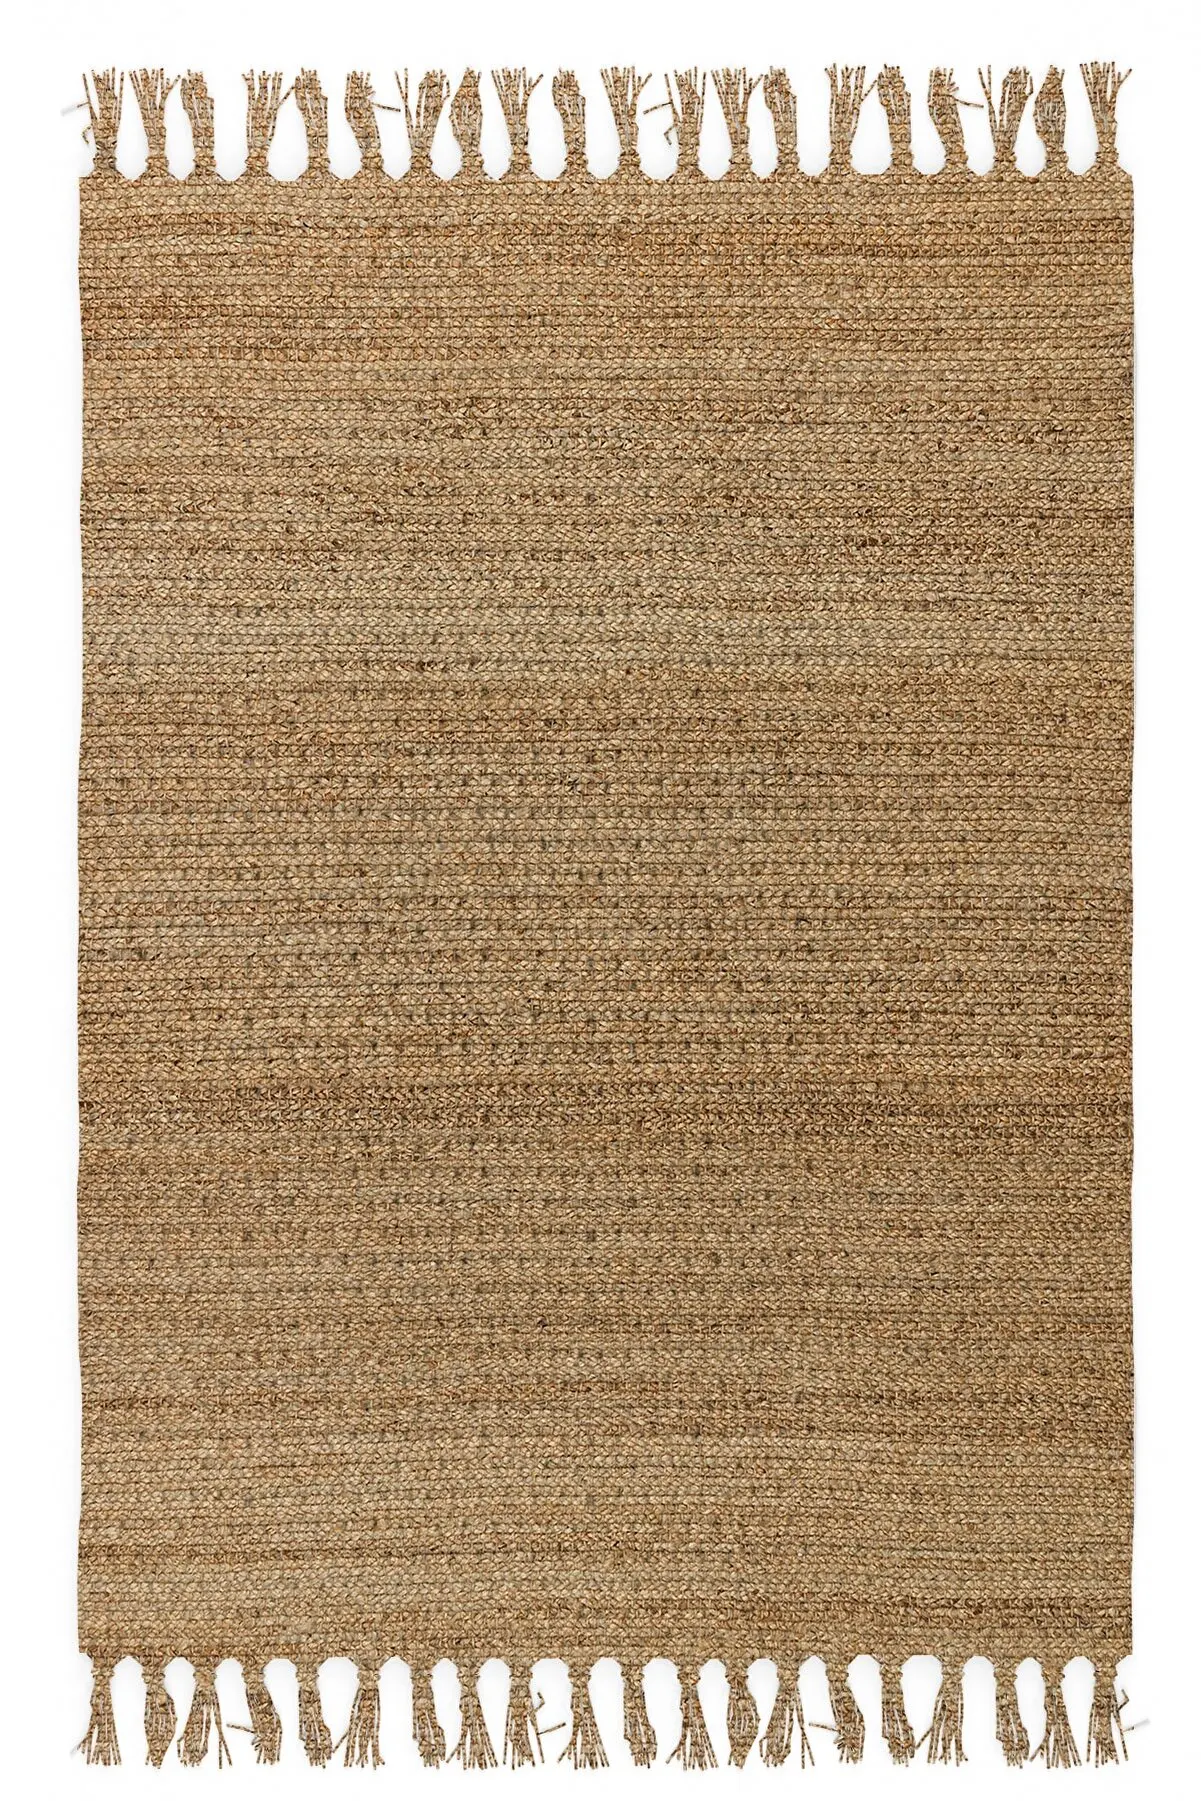 

Jute Straw Look Patterned Washable Tasseled Rug Stylish Quality Home Products Home Arrangement Straw Look Carpet